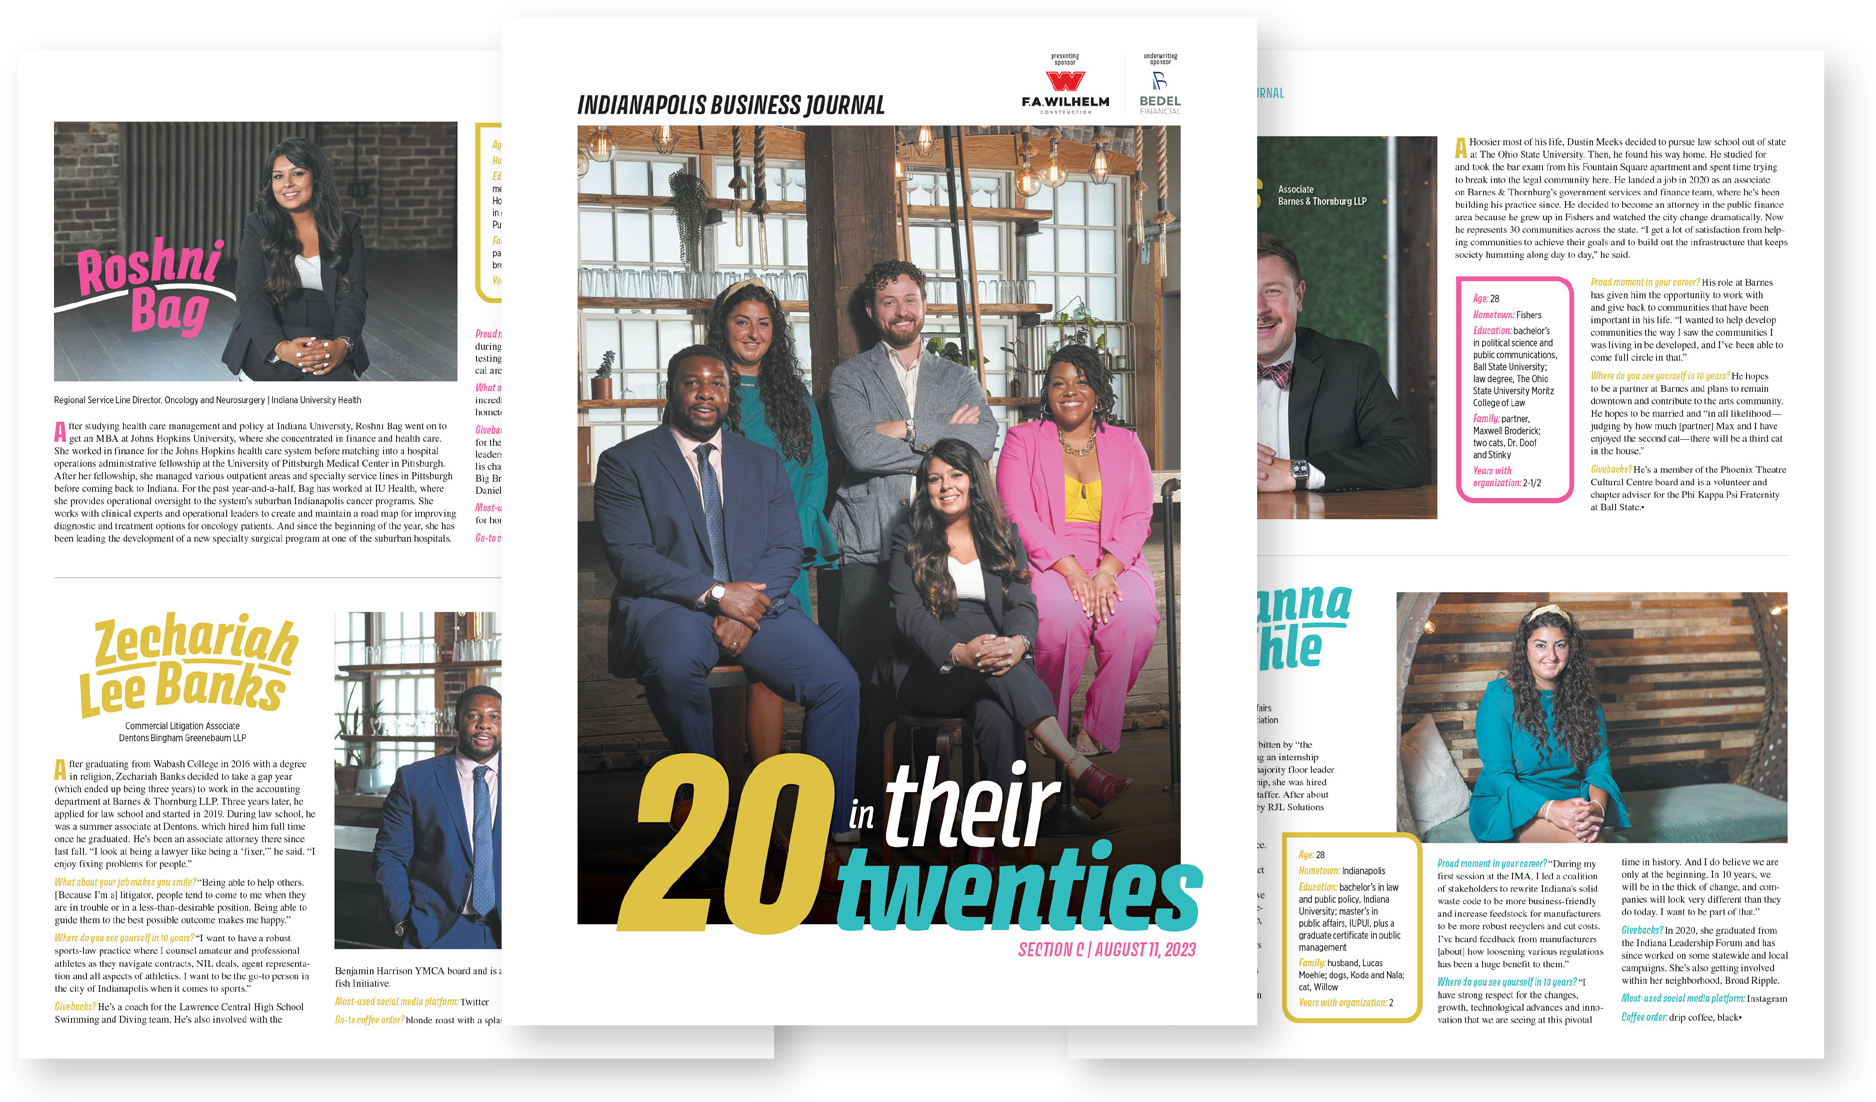 The cover and two interior pages from the 2023 Indianapolis Business Journal 20 in their Twenties supplement